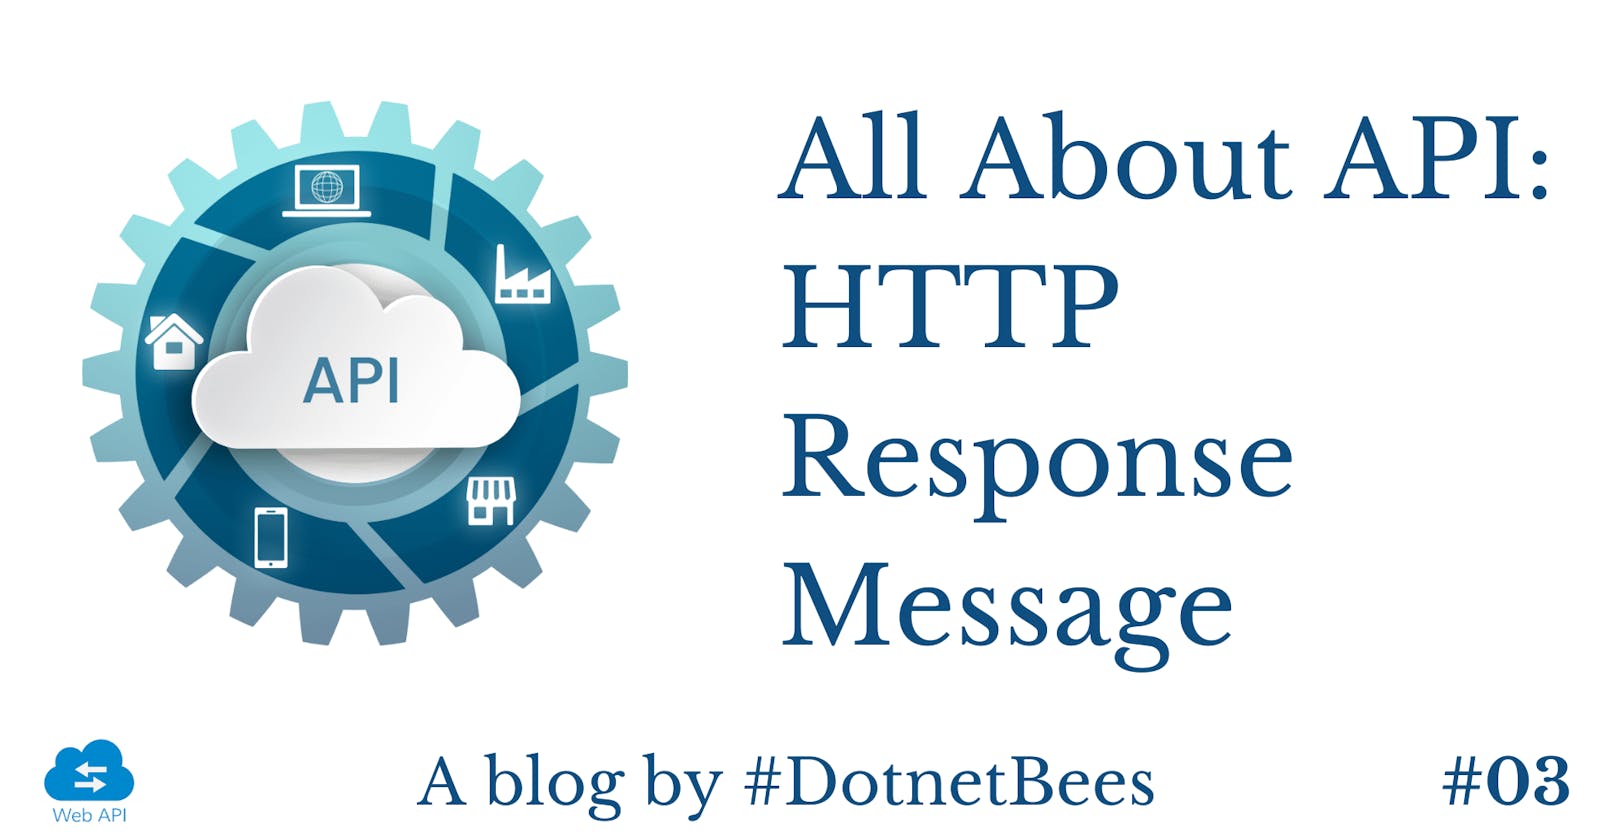 All About API: HTTP Response Message